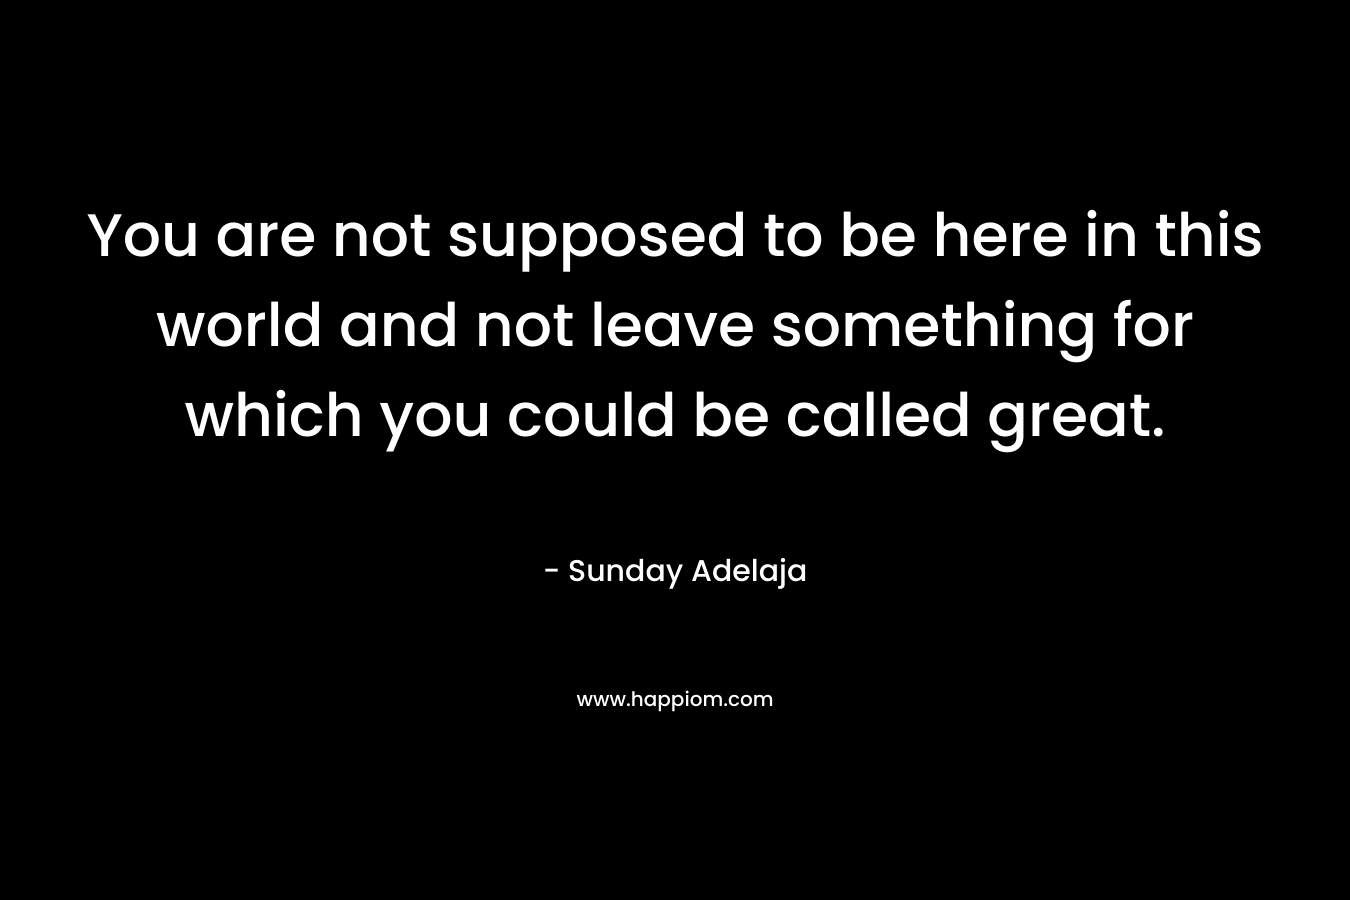 You are not supposed to be here in this world and not leave something for which you could be called great.